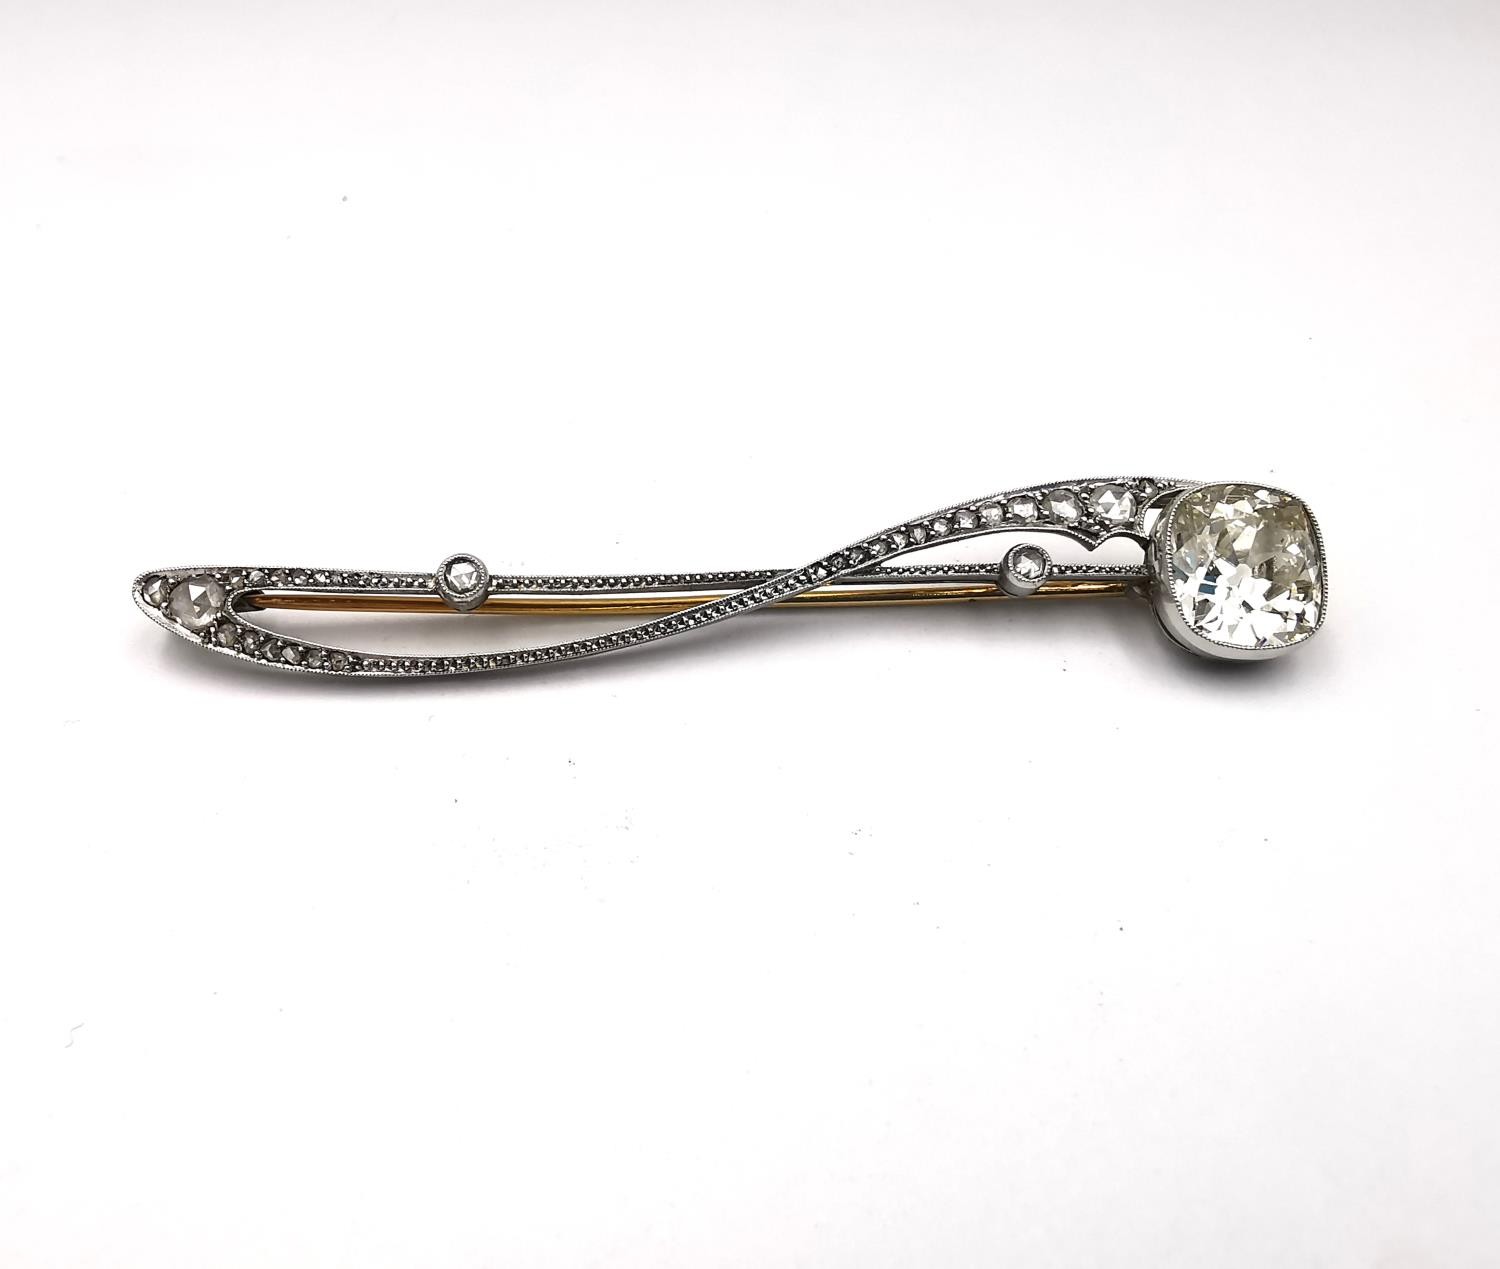 A French early 20th century Art Nouveau design platinum and diamond brooch. Set with a cushion